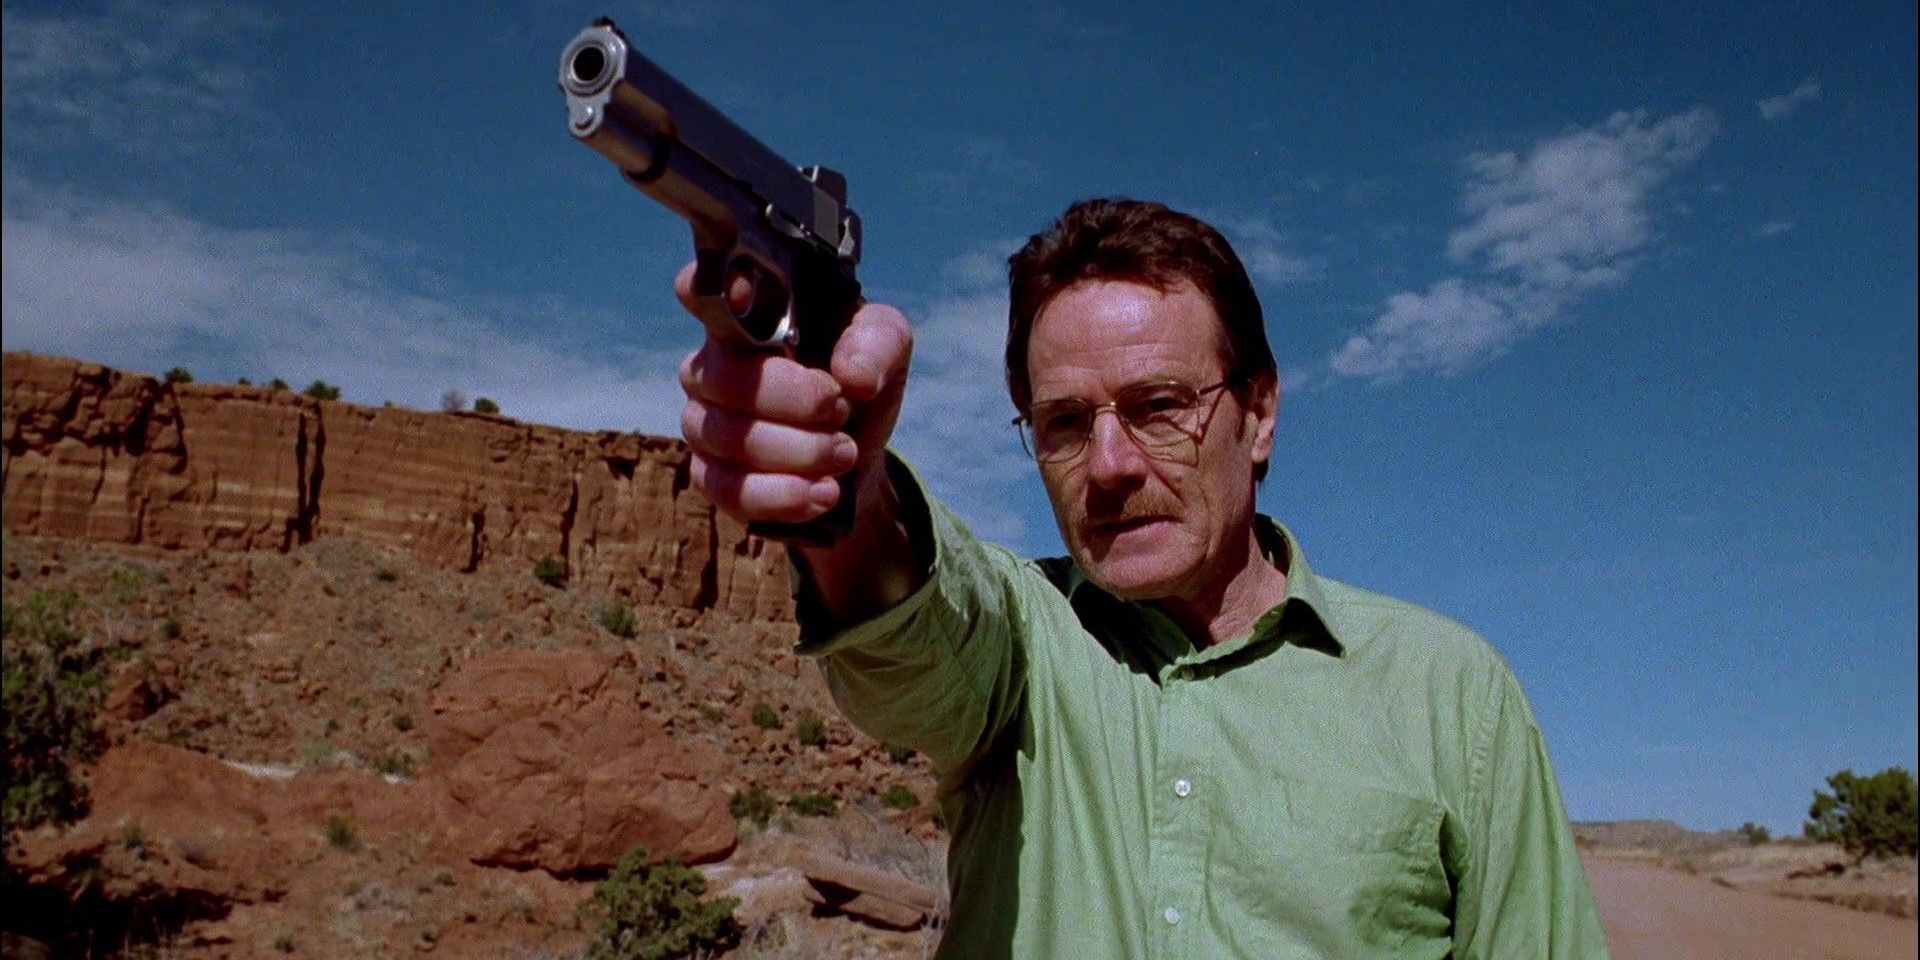 Walter White Wearing a Green Shirt and Holding a Gun in Breaking Bad Pilot